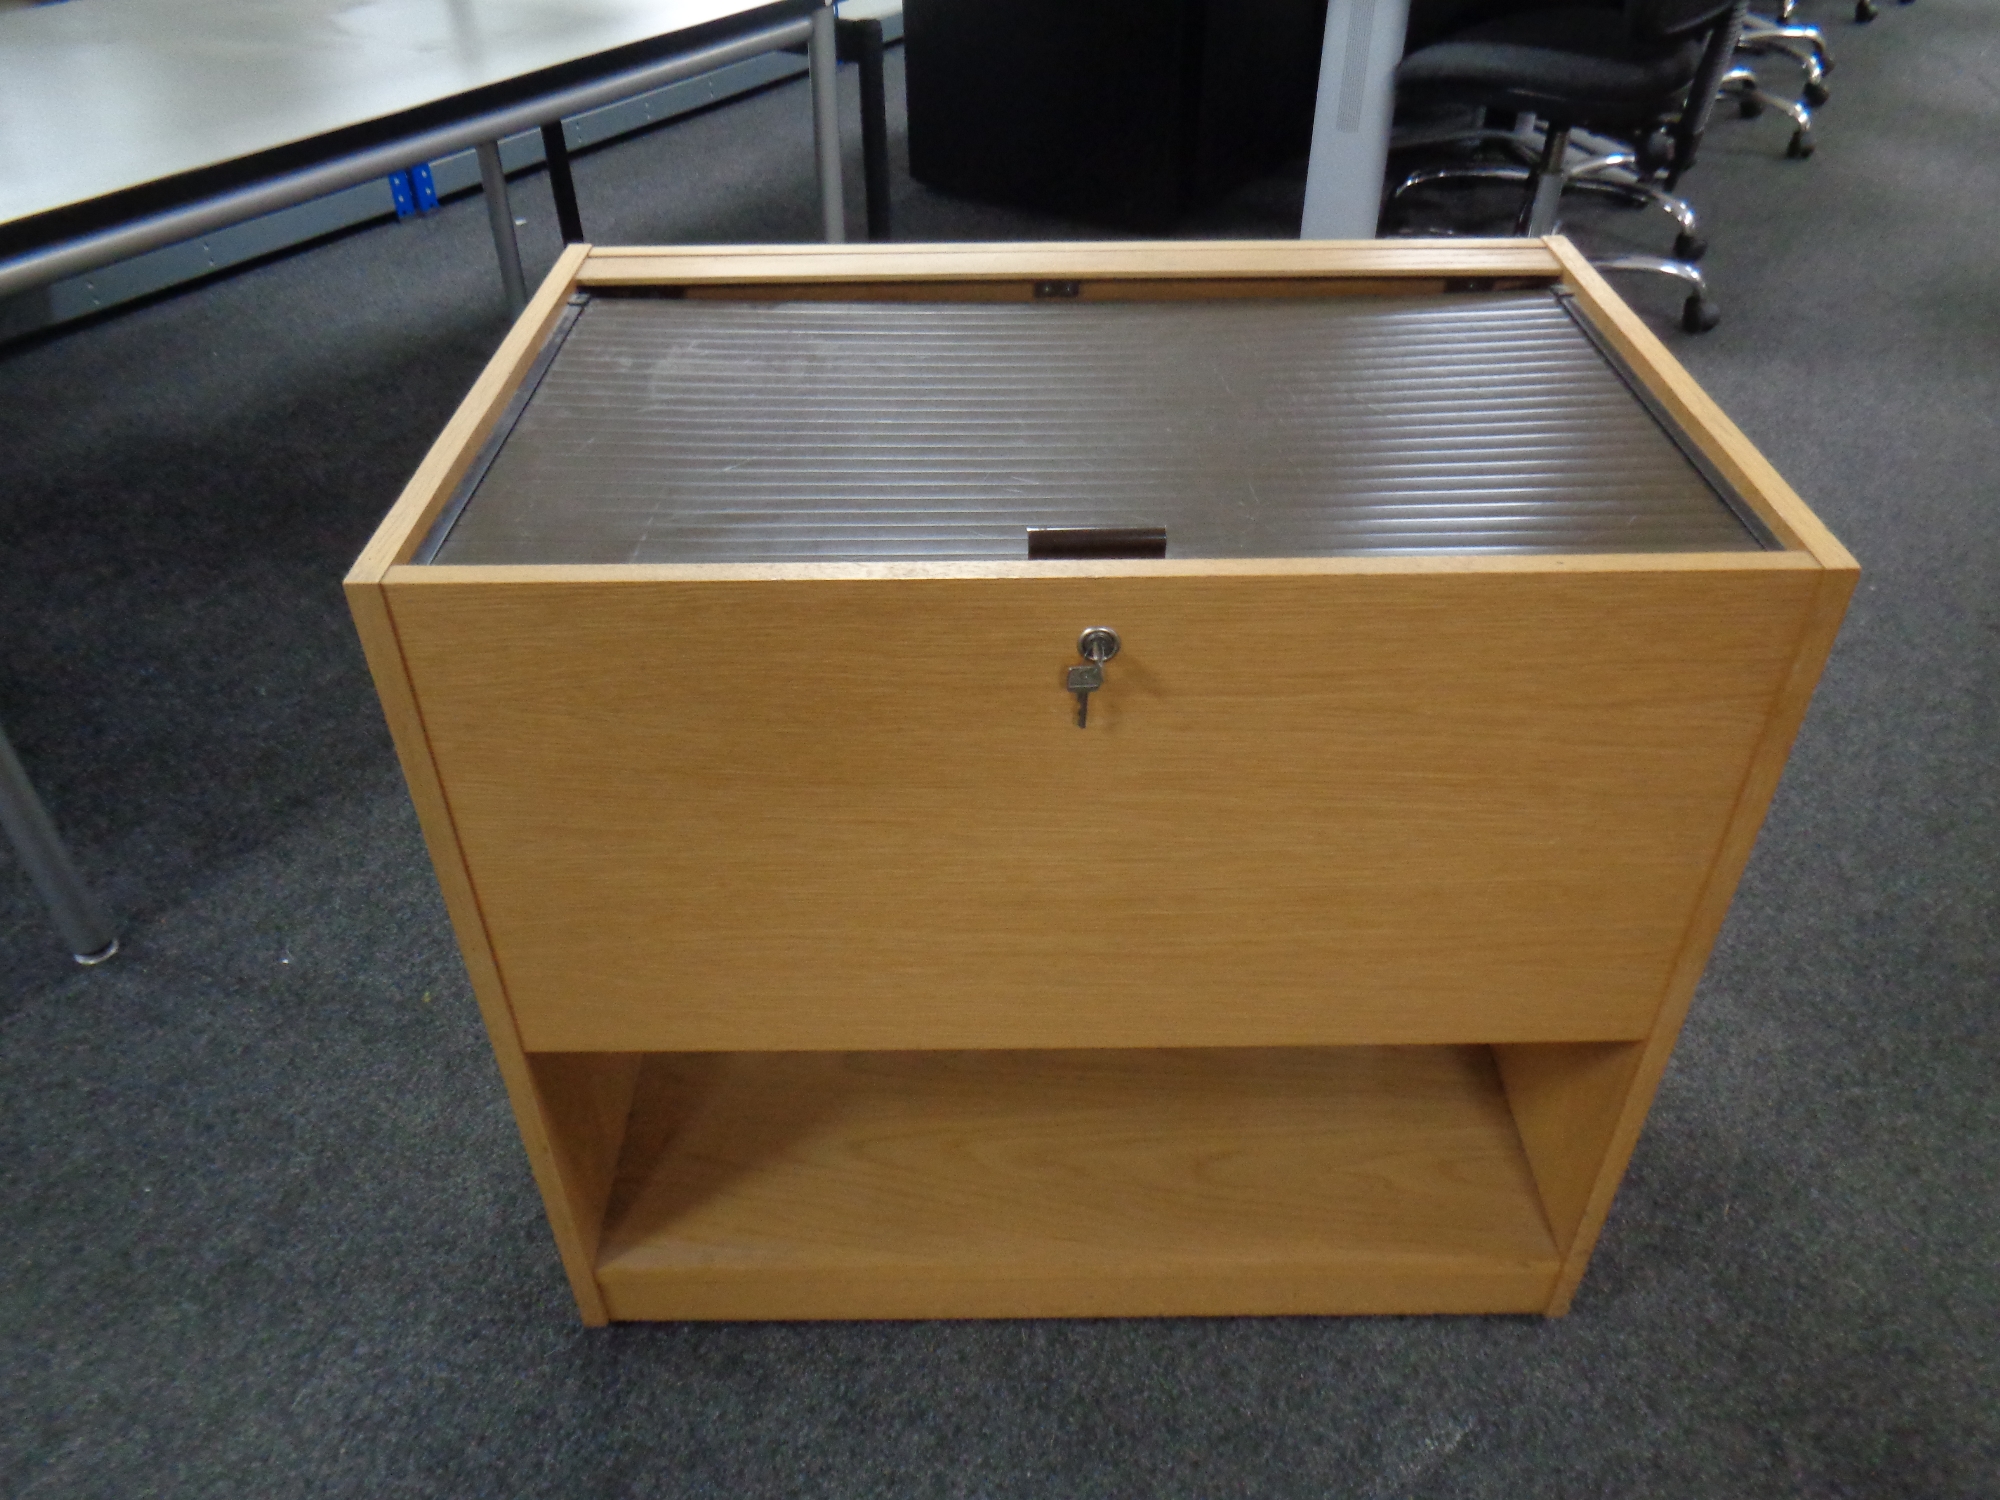 A portable wooden filing cabinet with shutter door top,